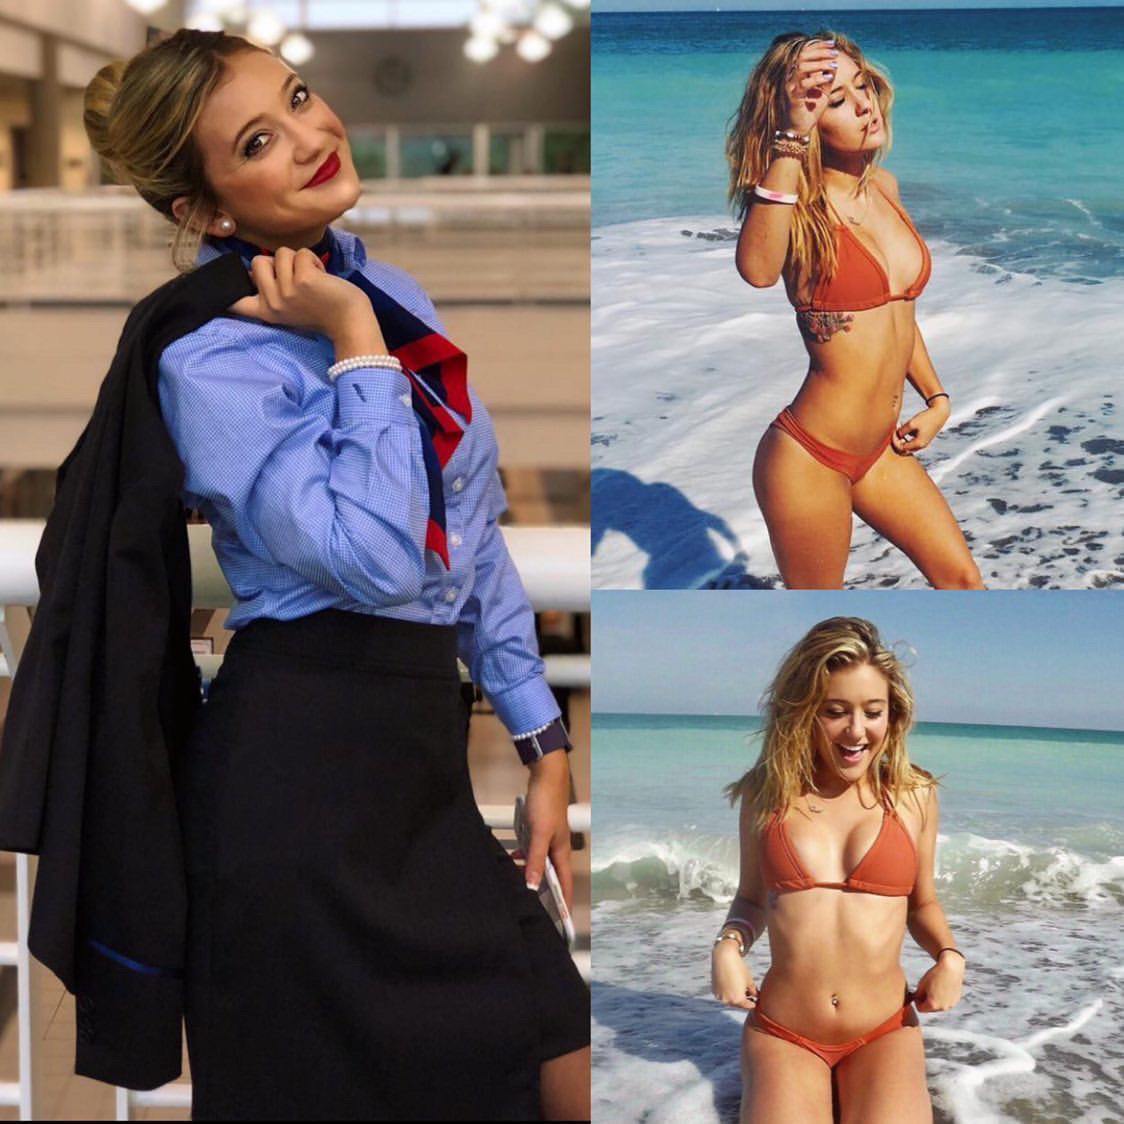 Ready To Fly With These Hot Flight Attendants?